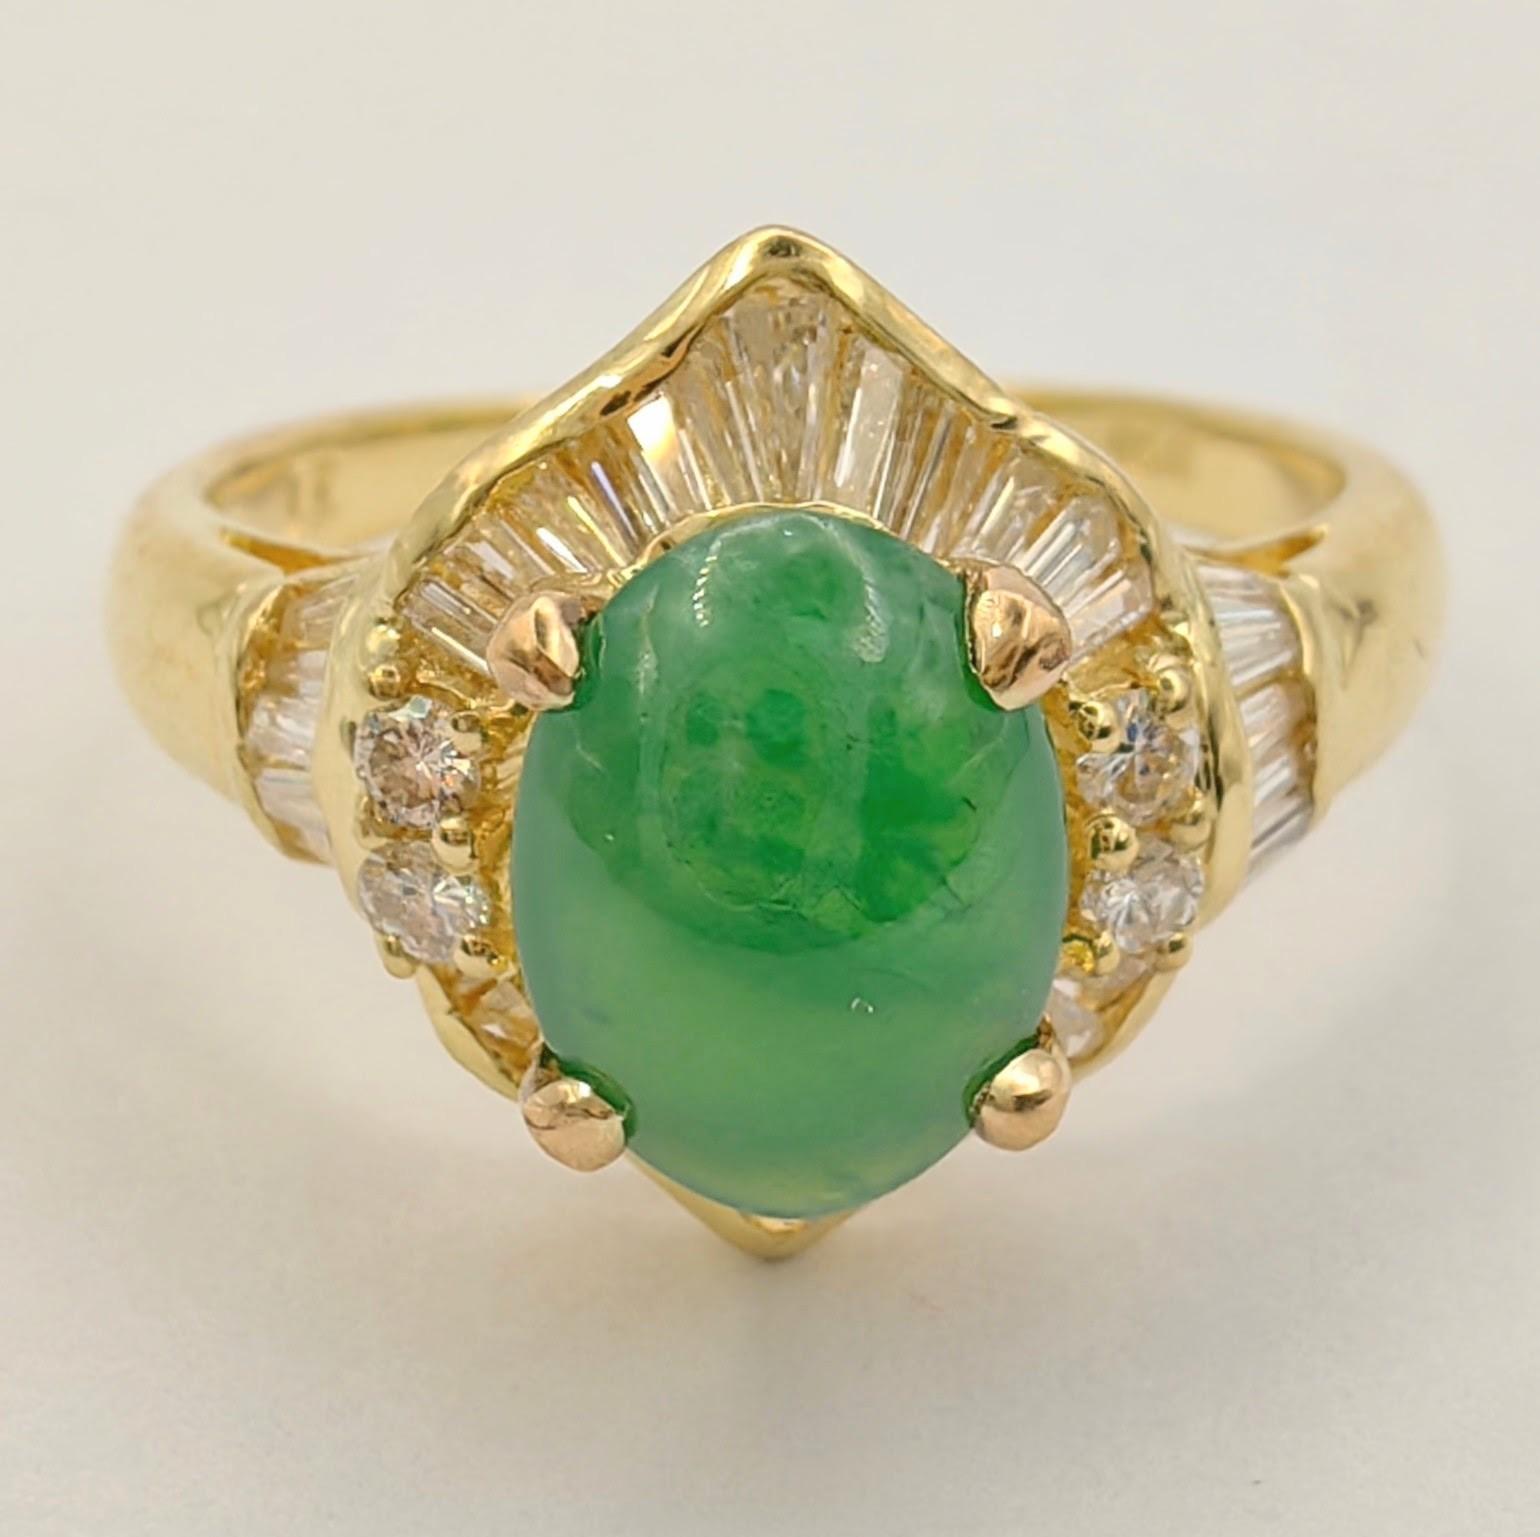 Introducing our extraordinary 1.56 Carat Oval Cabochon Apple Green Jadeite Jade Diamond Ring in 20K 850 Gold, a breathtaking piece that combines the allure of jadeite jade with the brilliance of diamonds.

The centerpiece of this ring is a